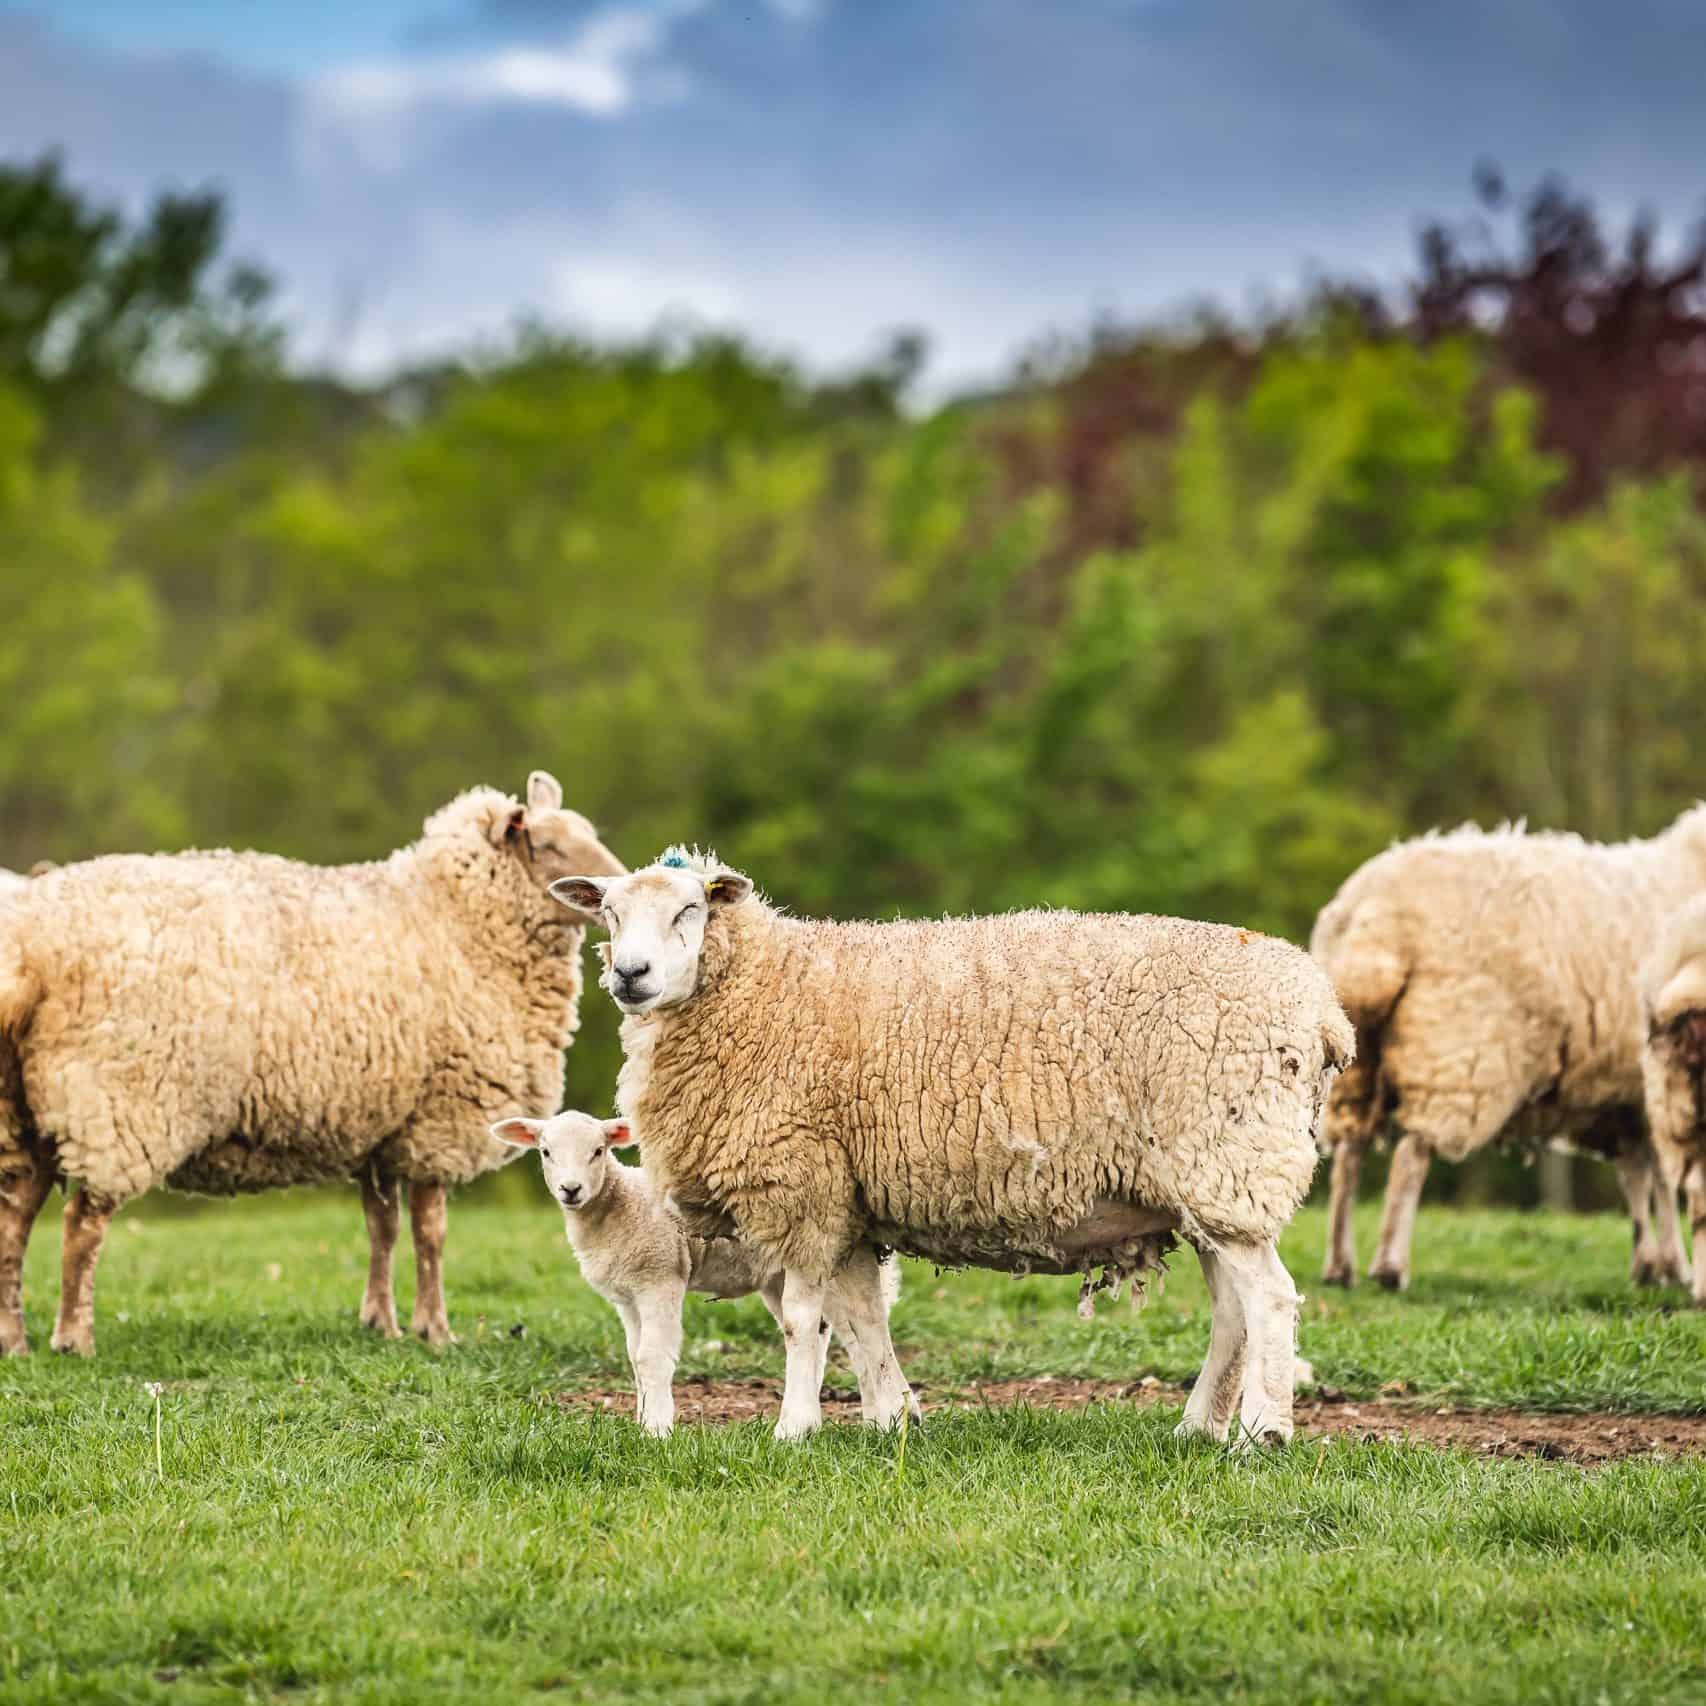 Lleyn ewes stood in grass field with one lamb